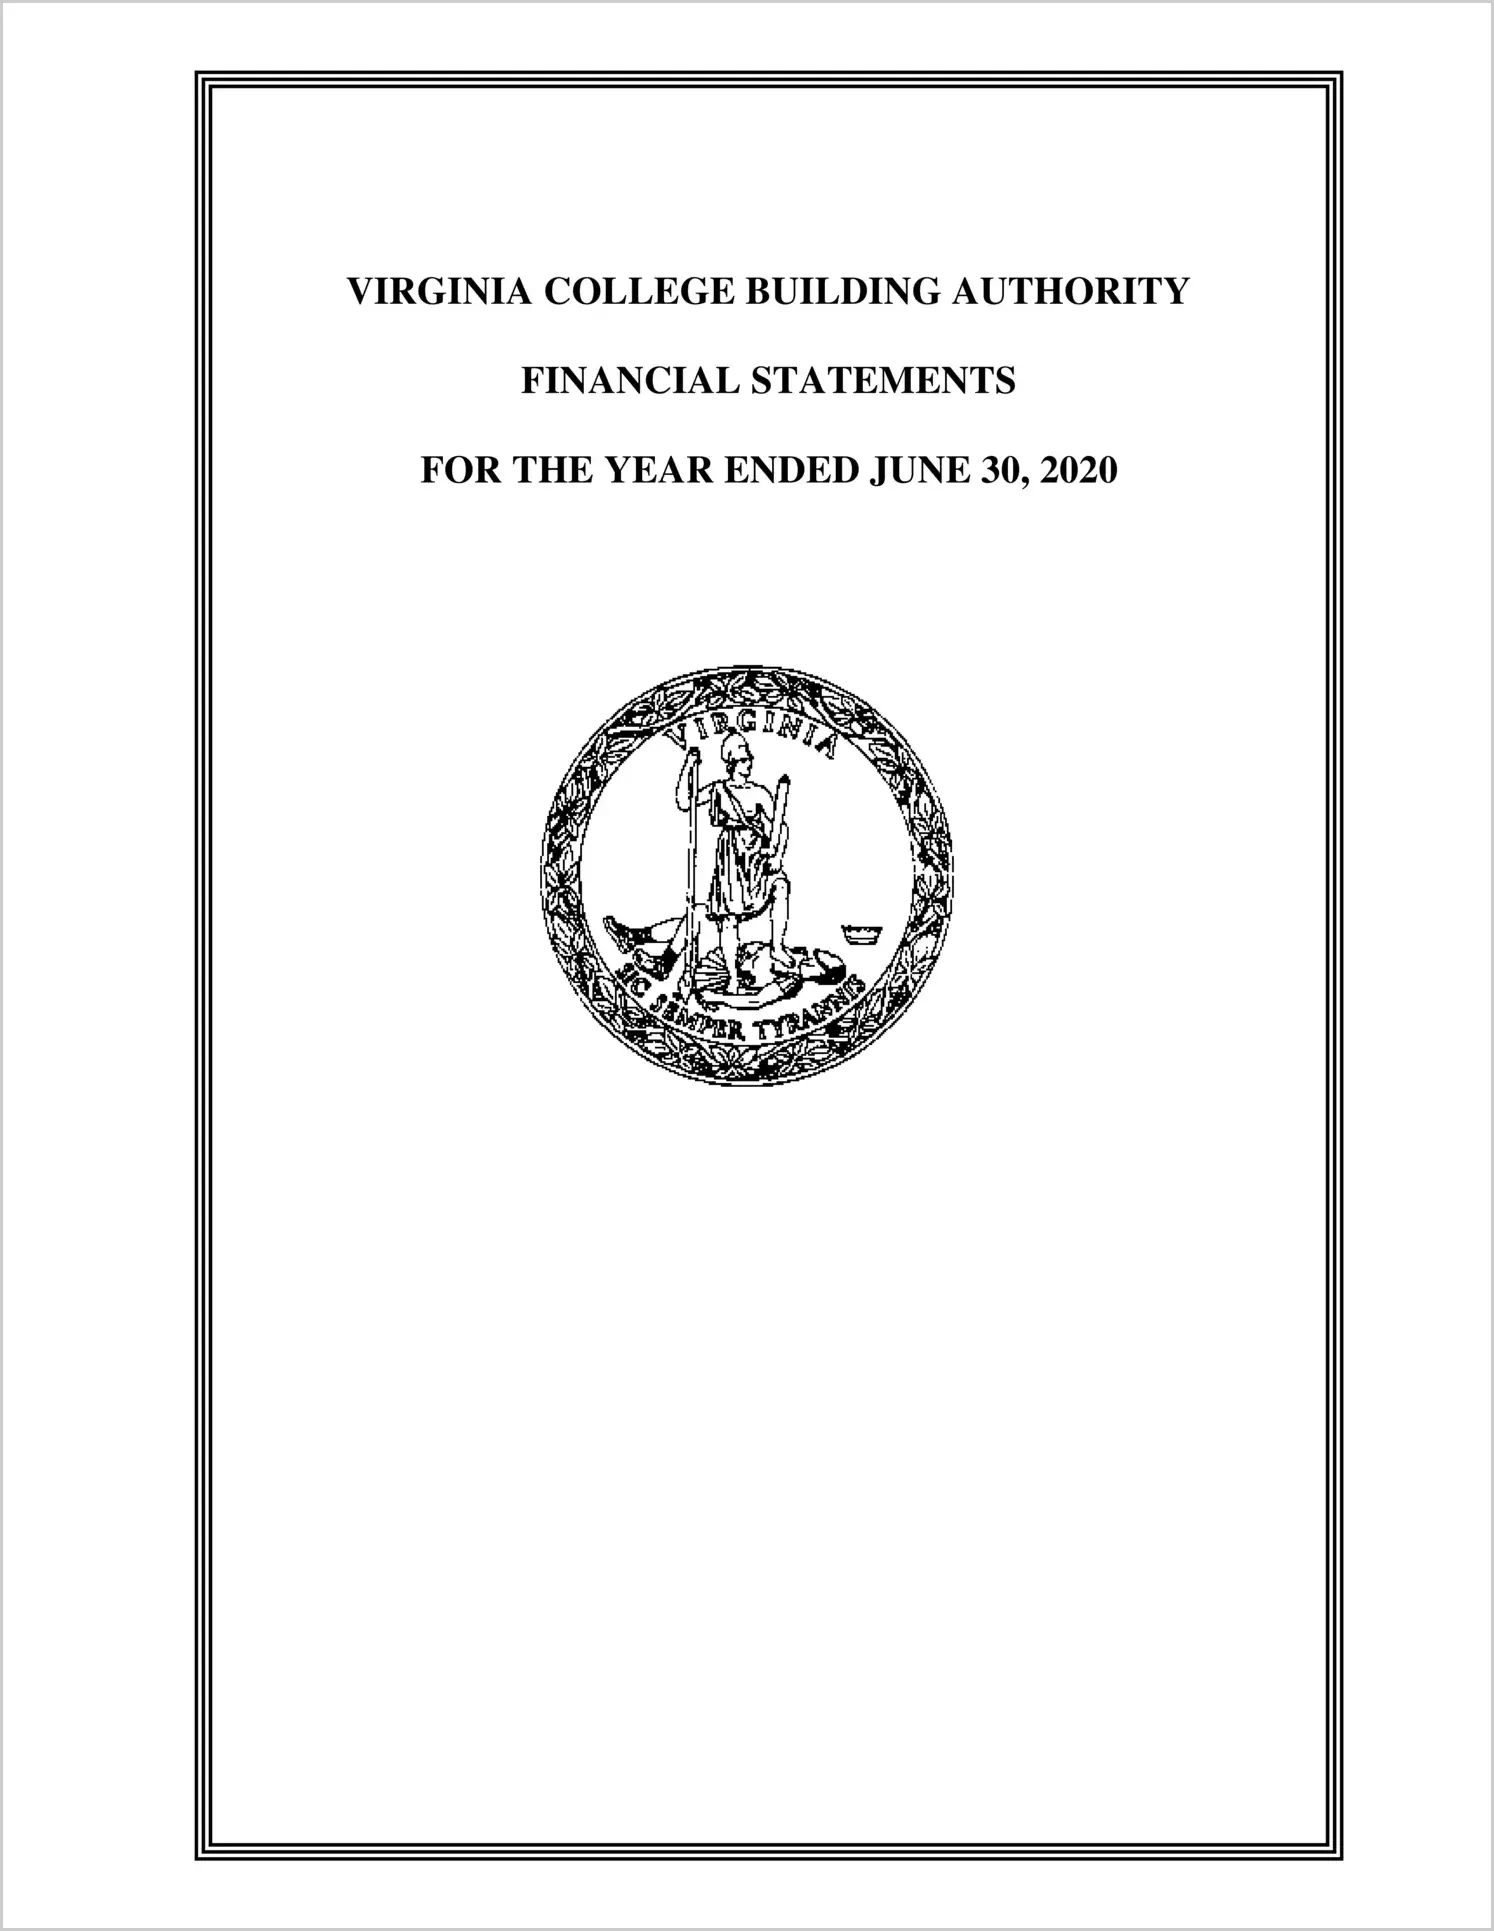 Virginia College Building Authority Financial Statements for the year ended June 30, 2020